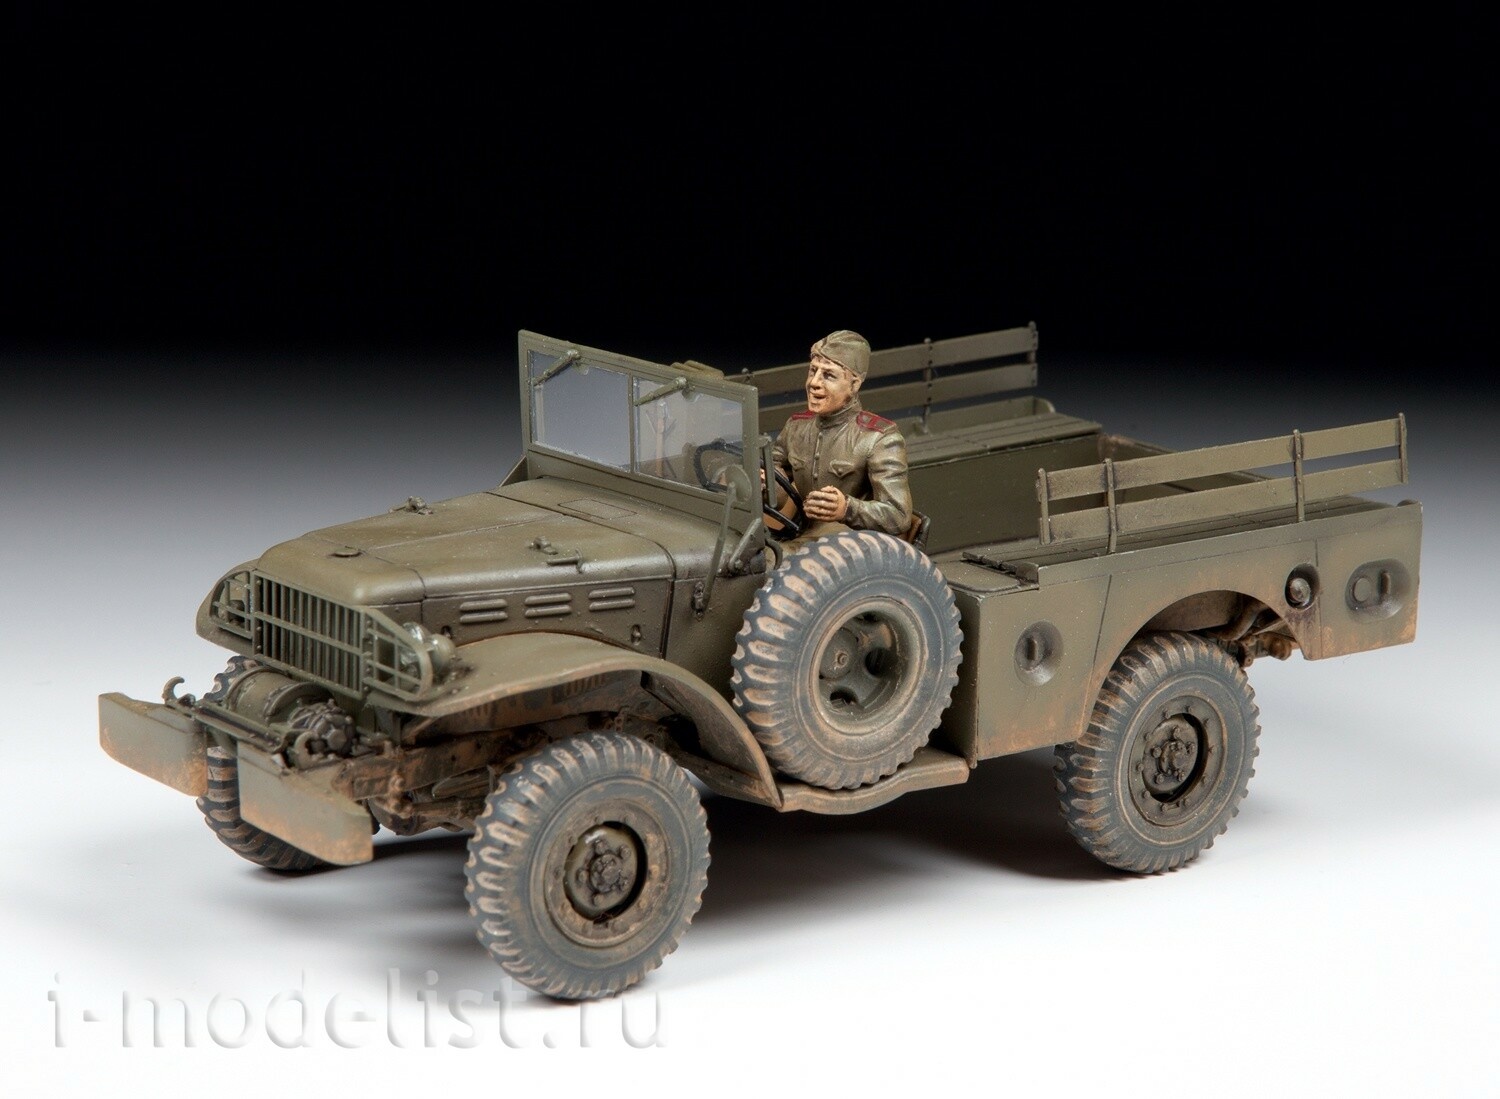 3664 Zvezda 1/35 PAmerican Army vehicle with winch WC-522 